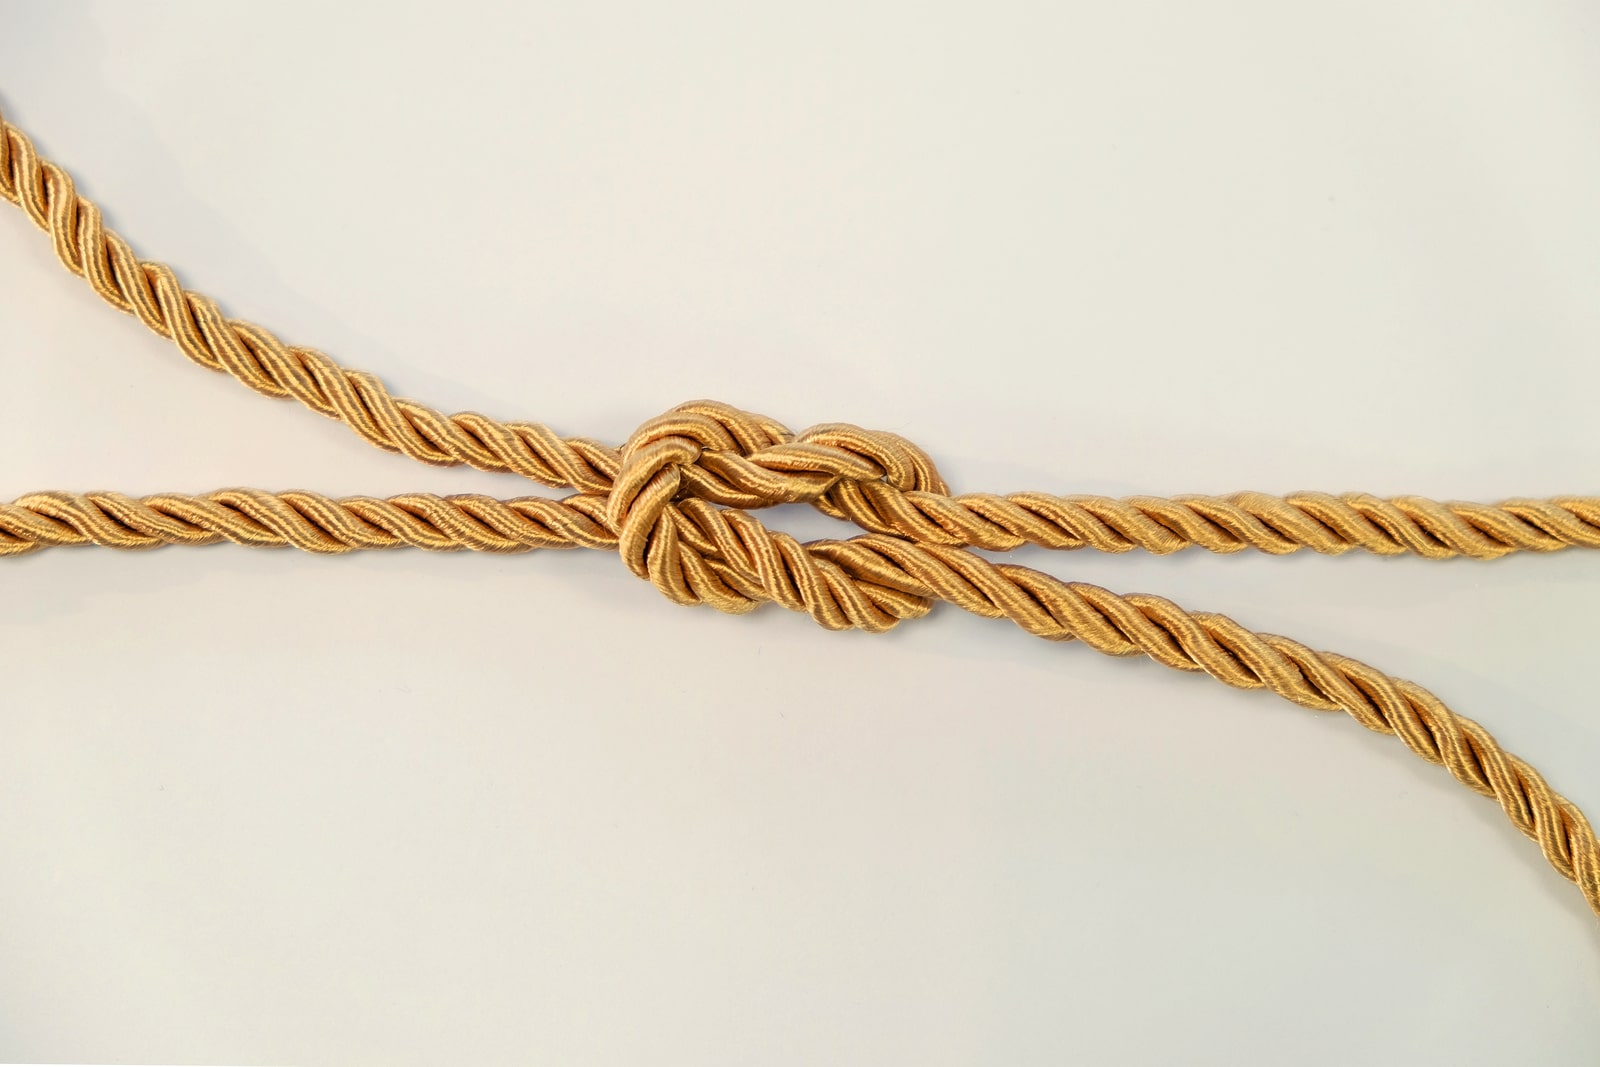 10 Popular Sailing Knots and How to Tie Them